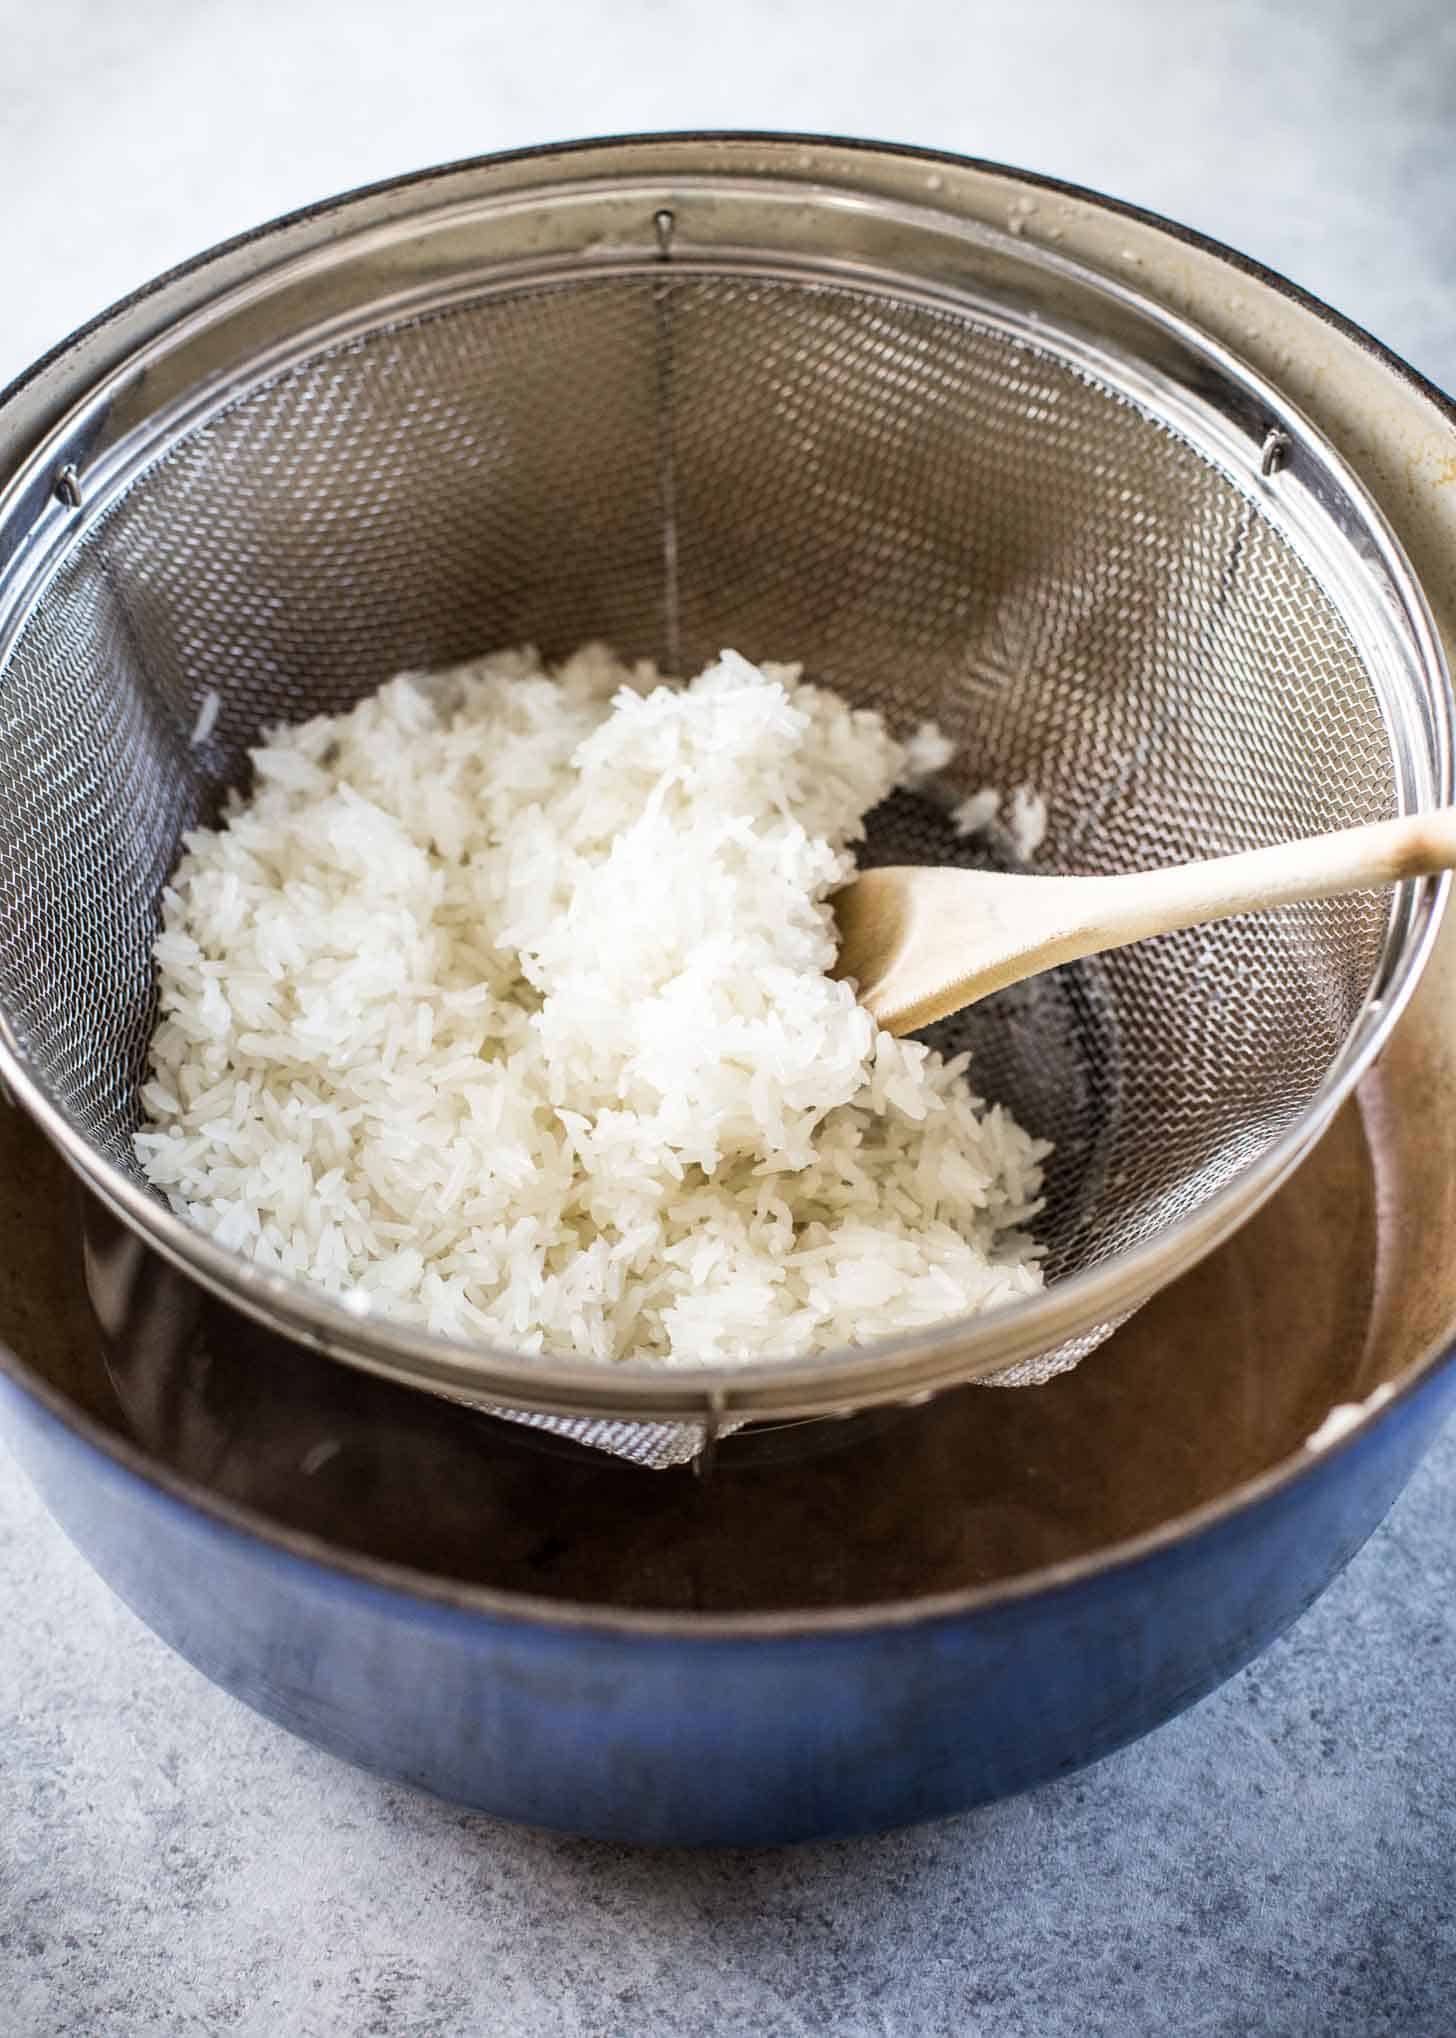 How Do You Cook Rice On The Stove Without It Sticking